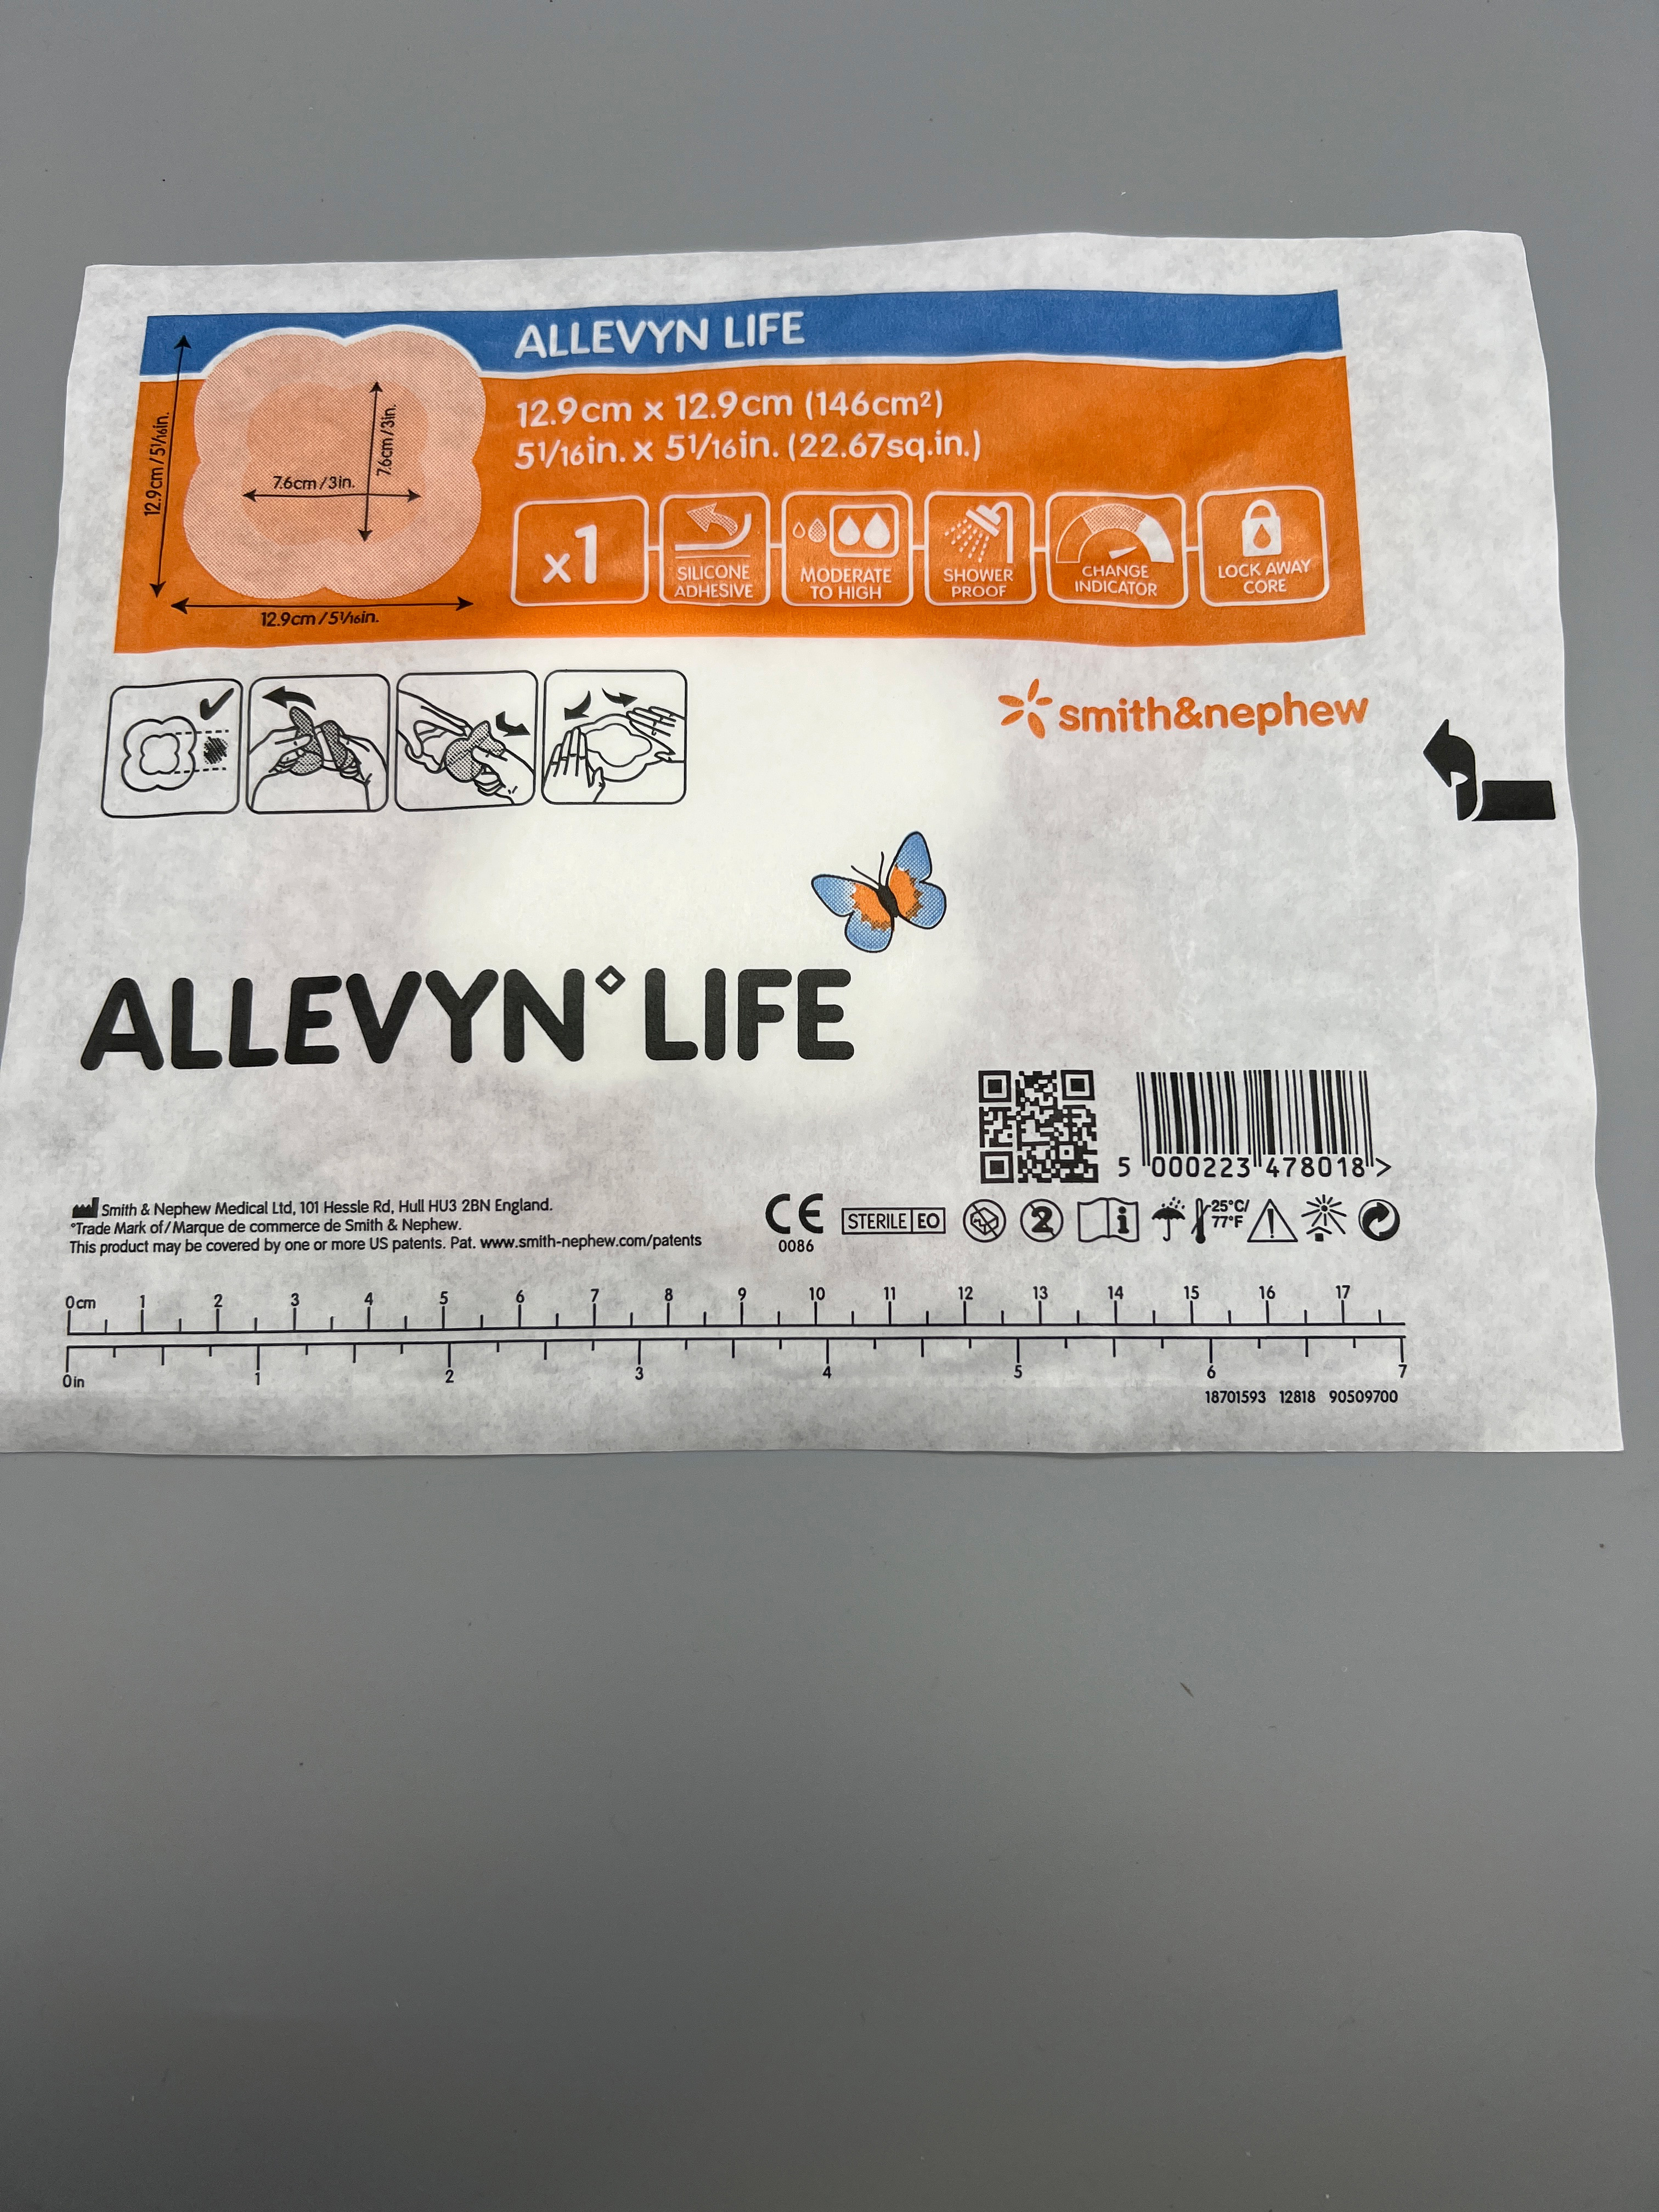 Silicone wound contact layer minimizes trauma to the wound and pain to the patient during dressing changes while allowing the dressing to be repositioned